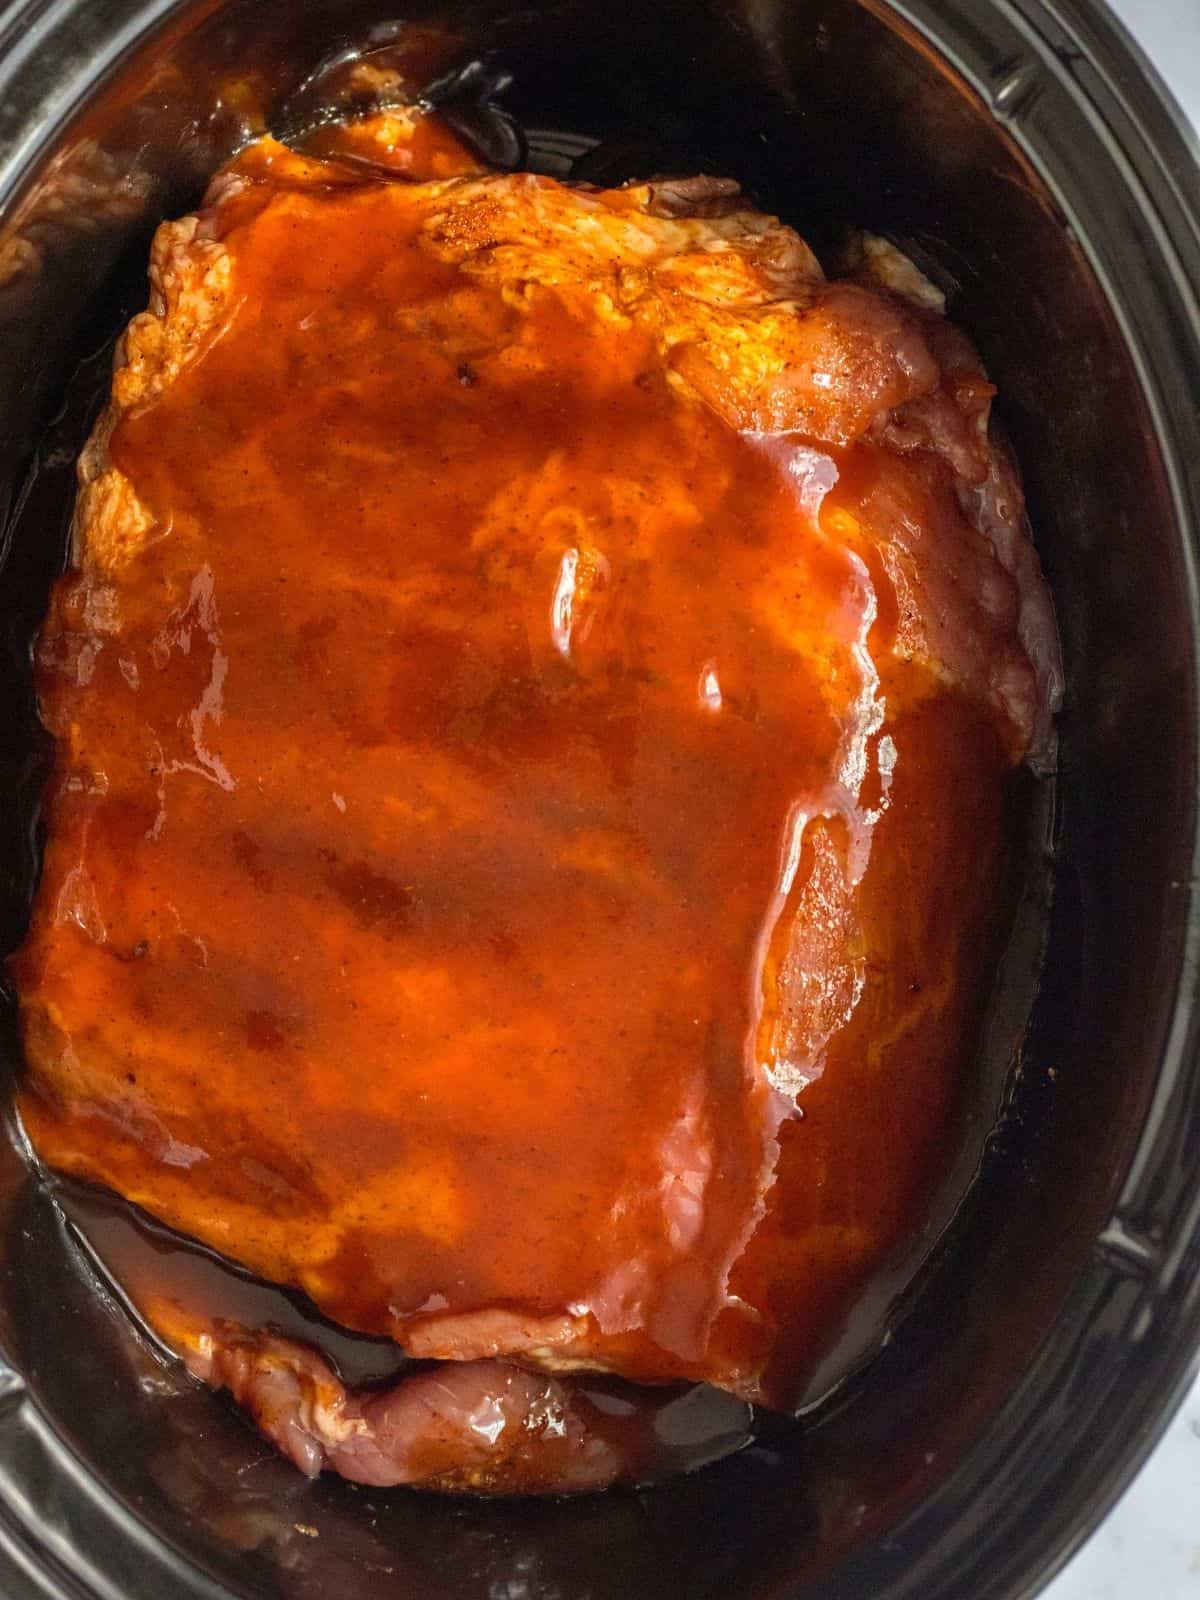 Ribs with barbecue sauce and coke soda in crock pot.